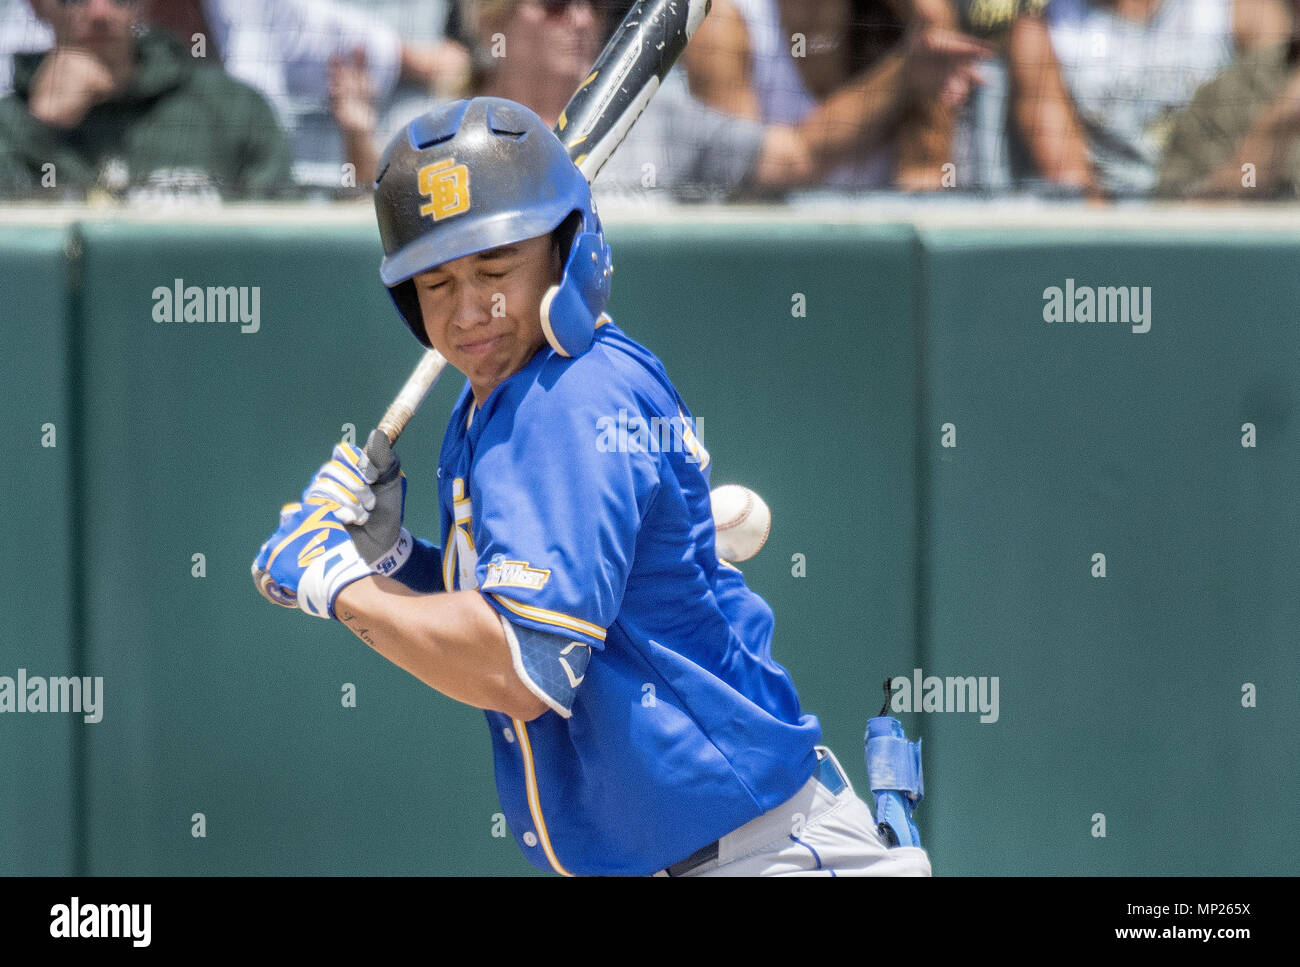 San Luis Obispo, California, USA. 20th May, 2018. UC Santa Barbara second basemen ANDREW MARTINEZ gets hit by a pitch in the first inning against Cal Poly, San Luis Obispo. Cal Poly would go on to win the game 9-3. Credit: Erick Madrid/ZUMA Wire/Alamy Live News Stock Photo